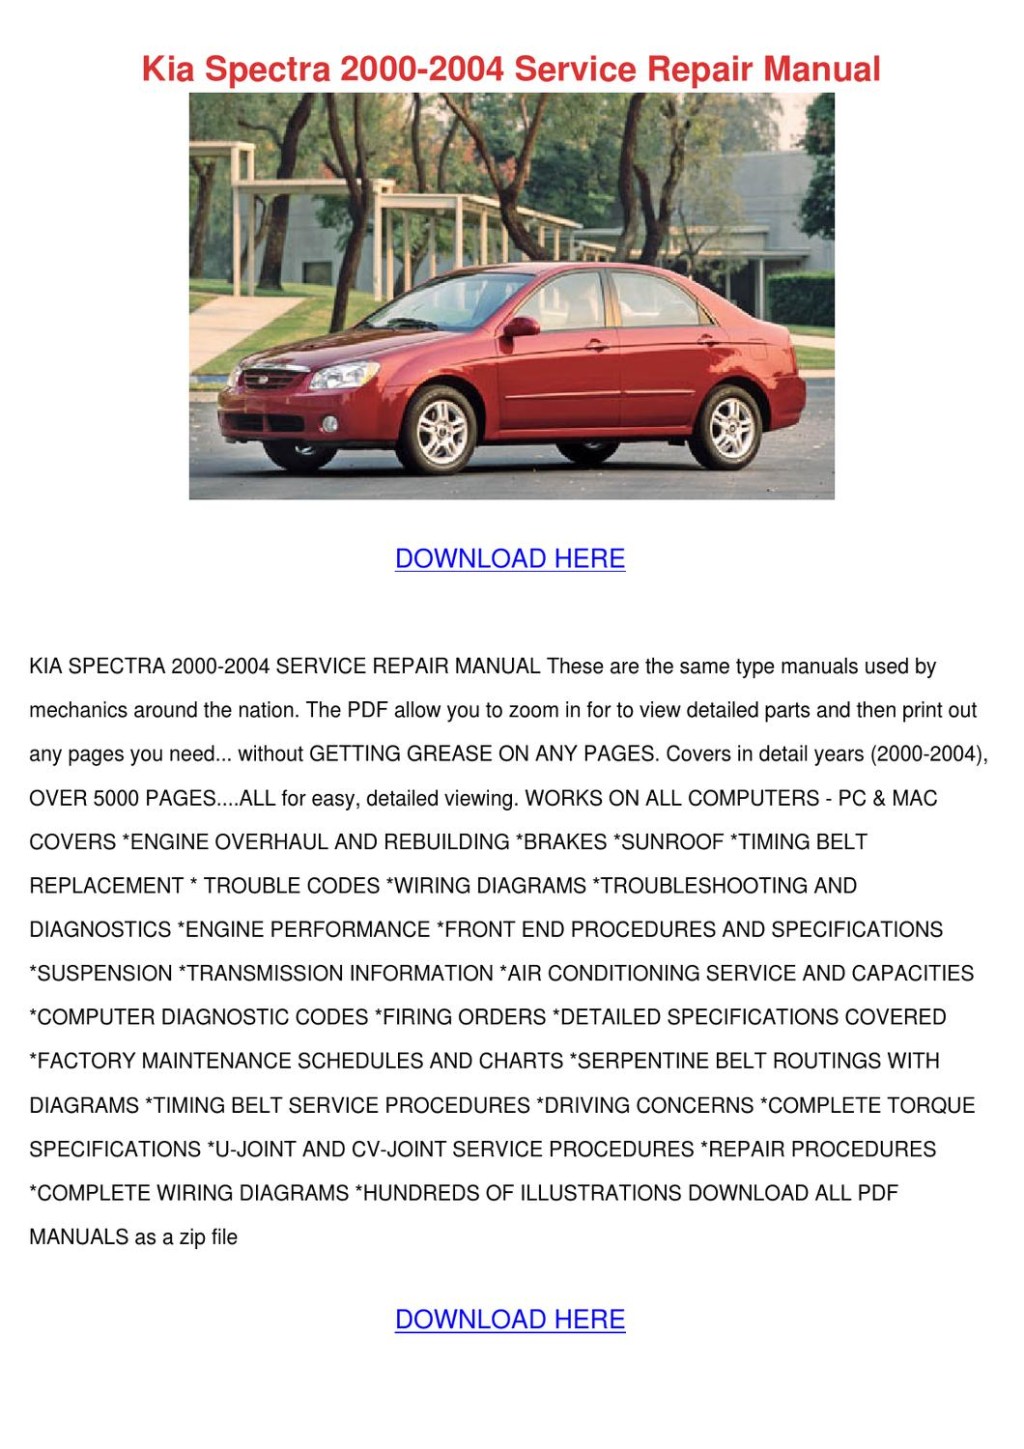 Picture of: Kia Spectra   Service Repair Manual by Katrina Scholle – Issuu